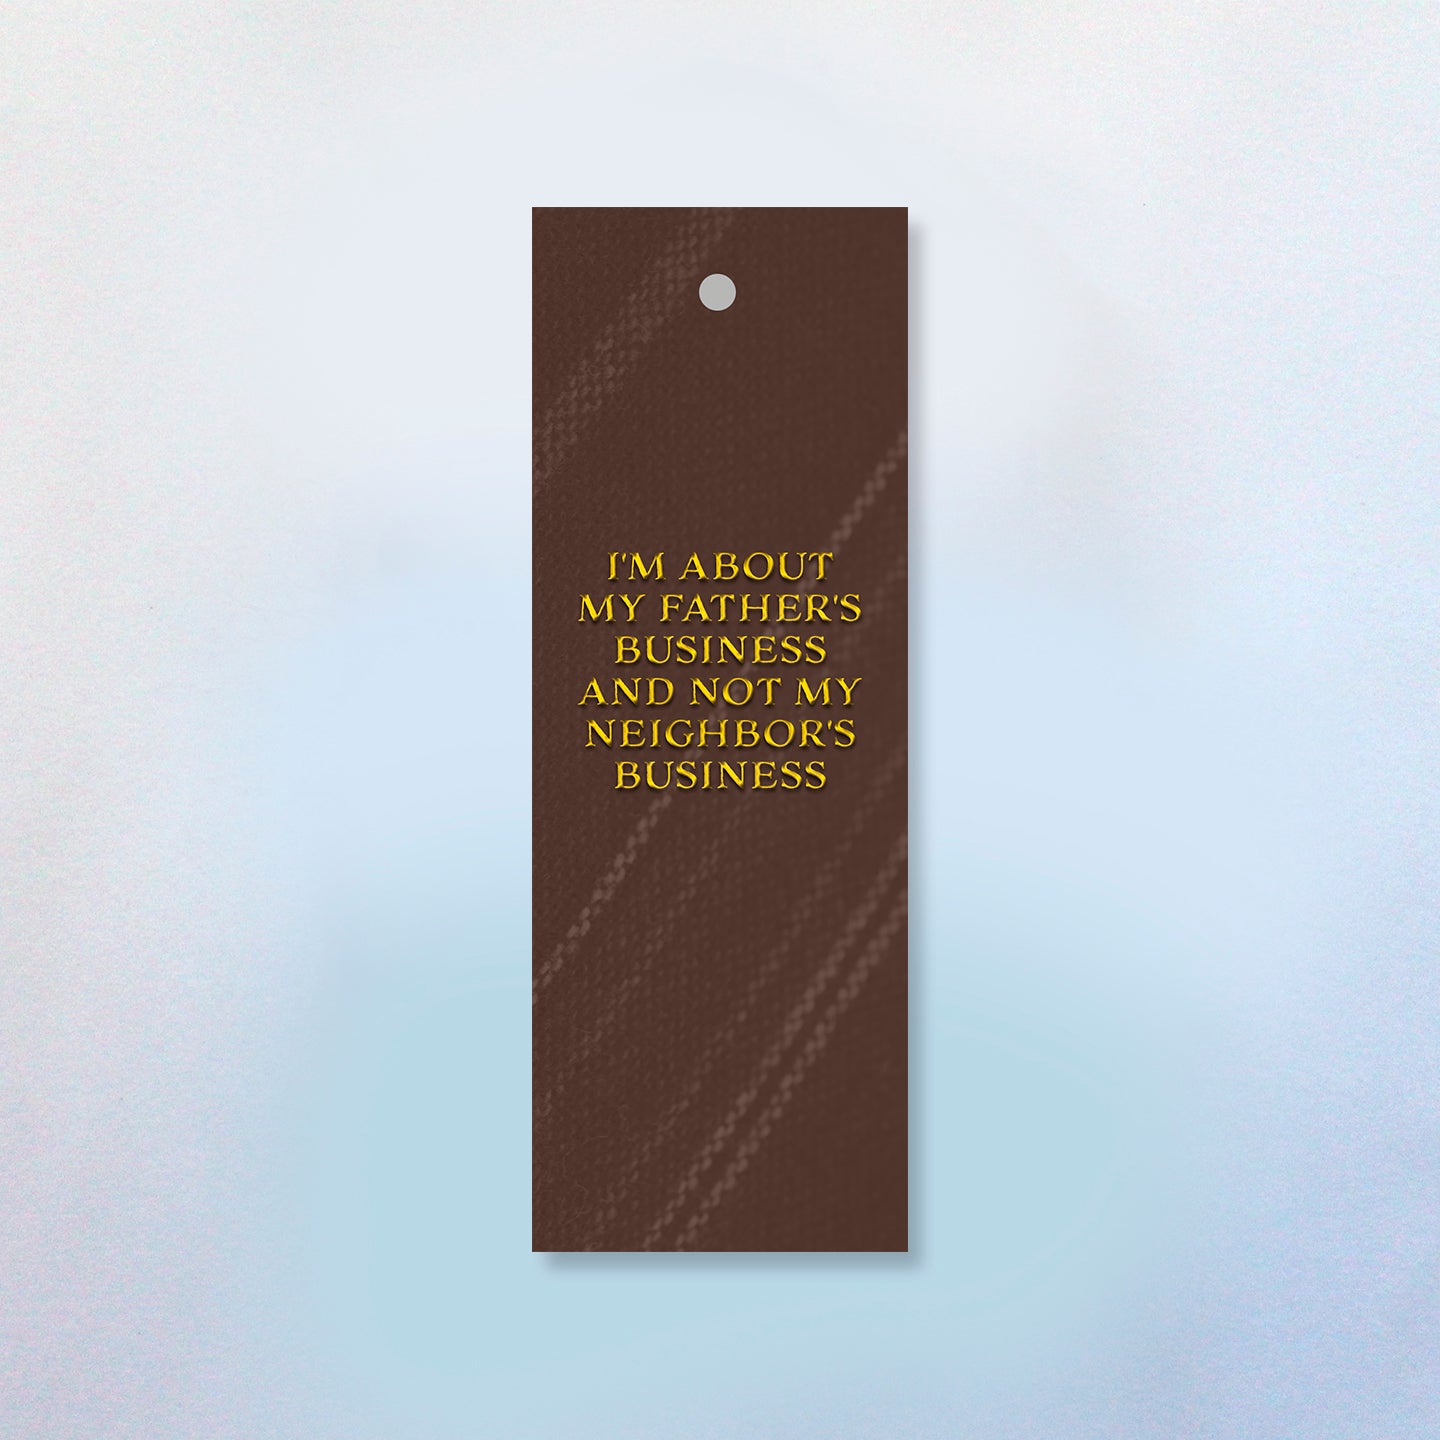 I'm About My Father's Business and Not My Neighbor's Business (3 Styles) Bookmark